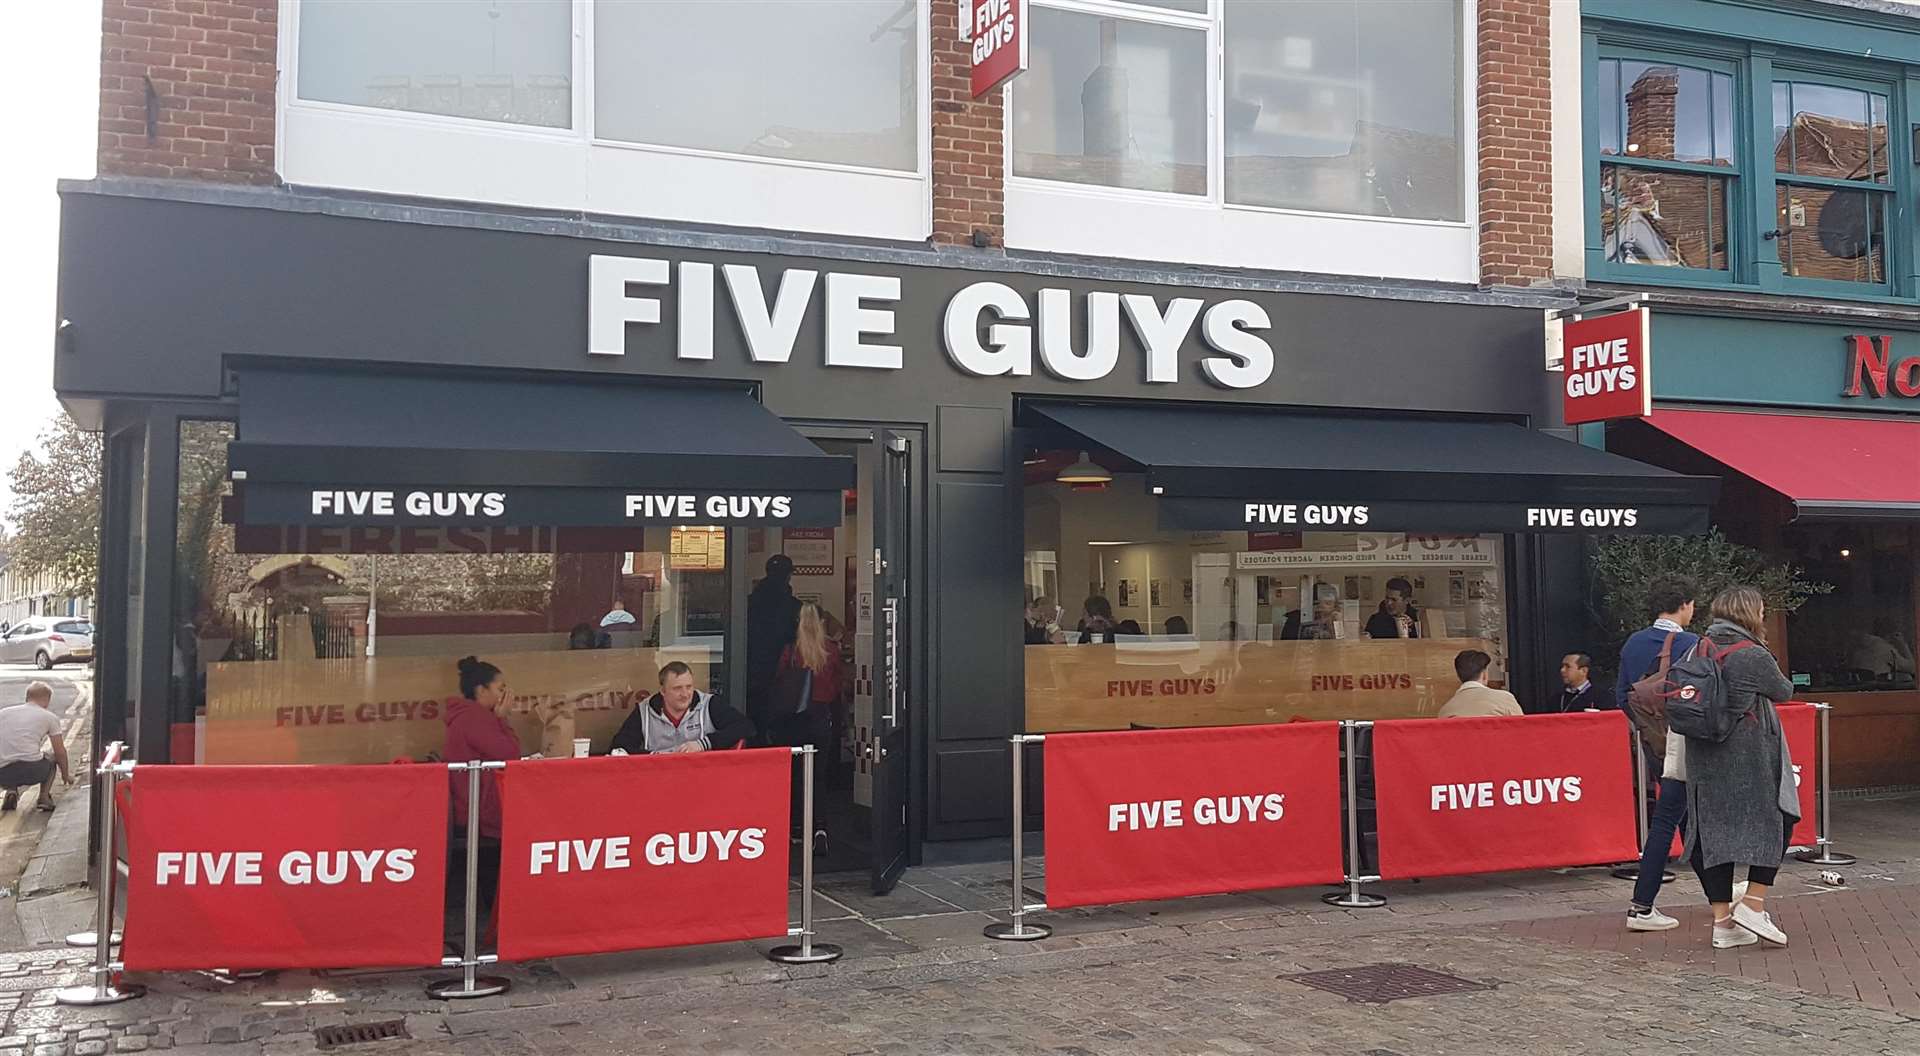 Five Guys is now open for business